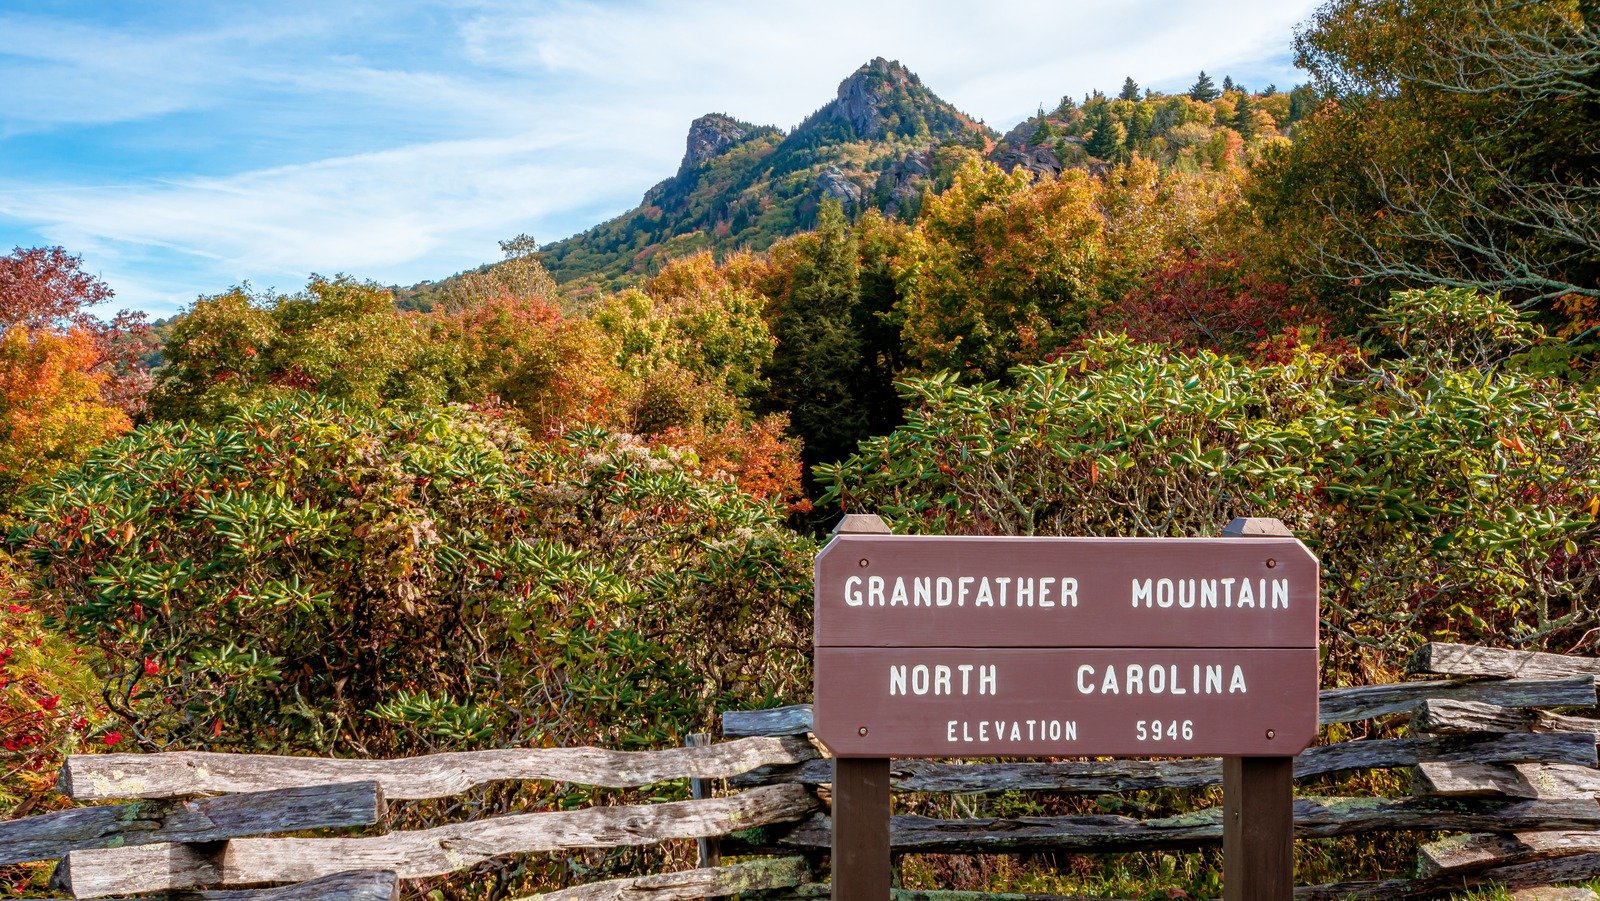 Hiking This Popular North Carolina Mountain Trail Is Not For Amateurs